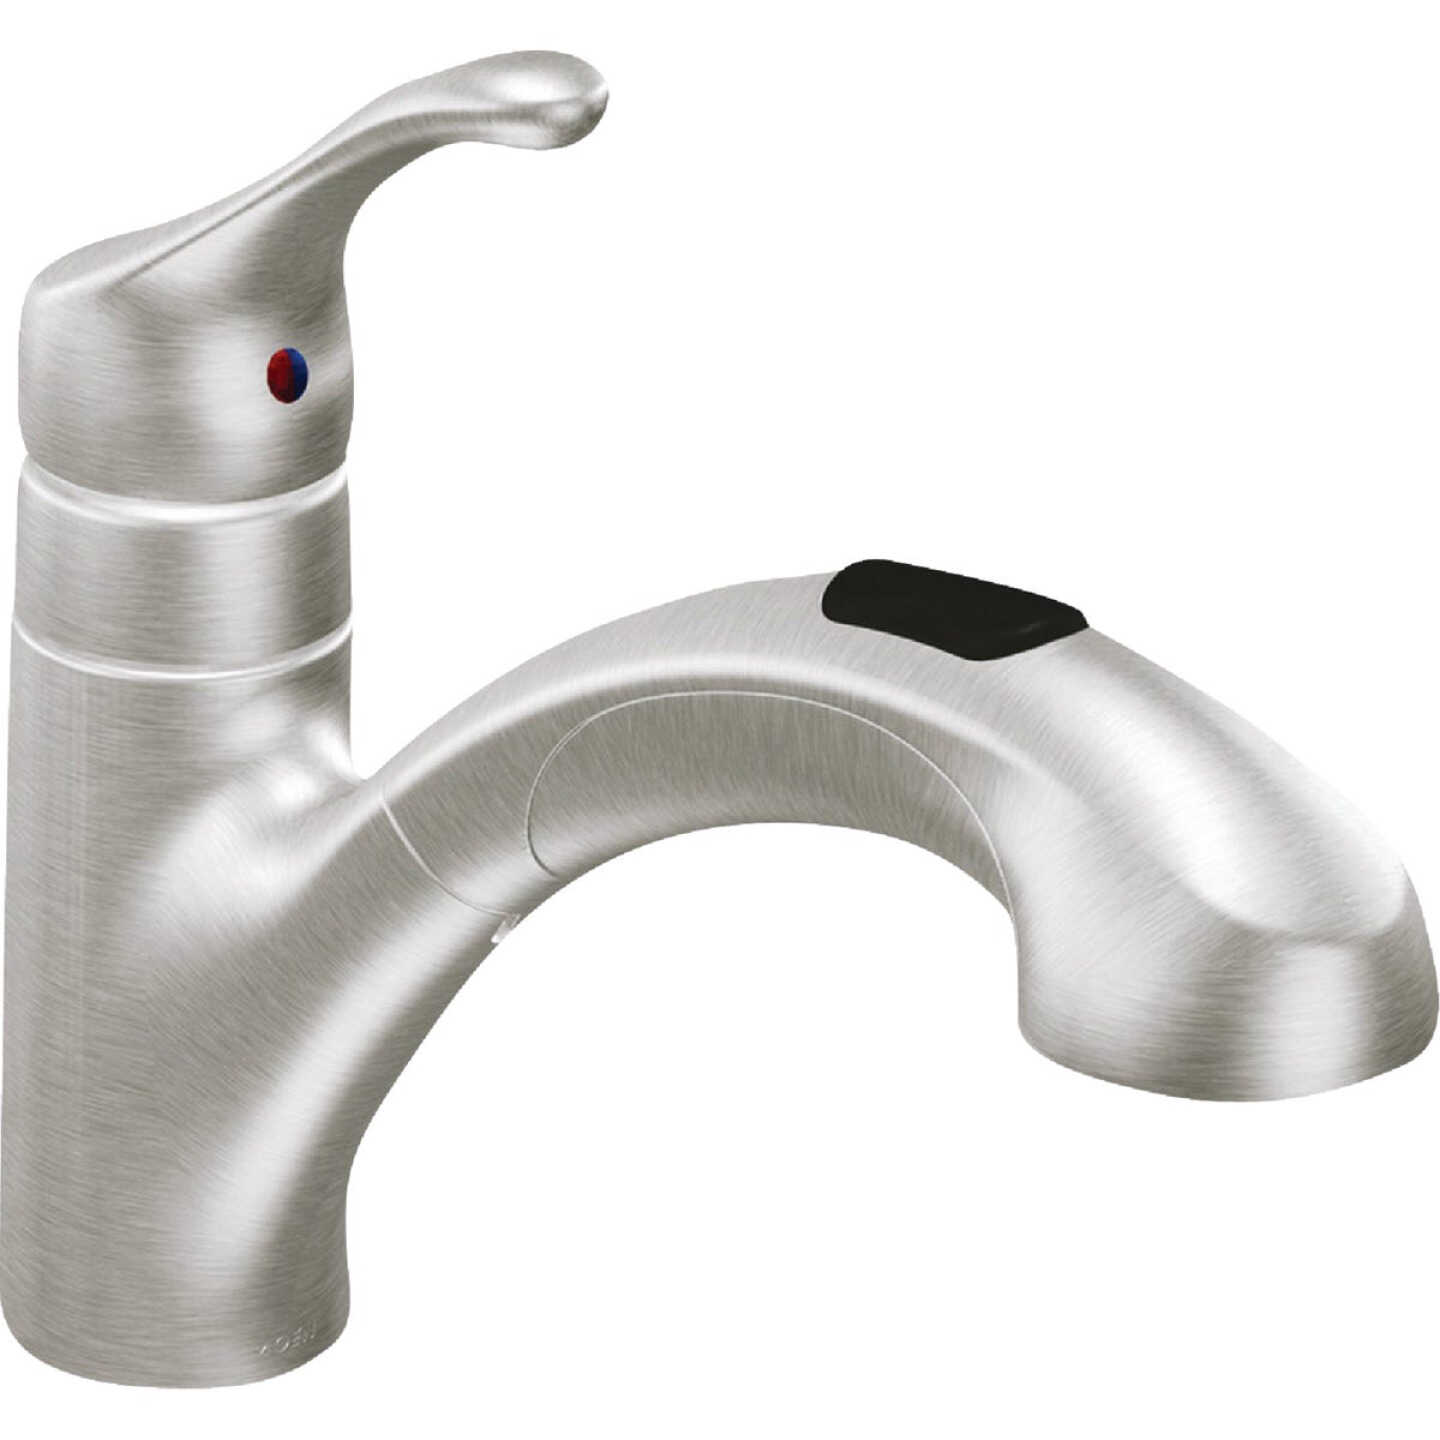 Moen Renzo Single Handle Lever Pull Out